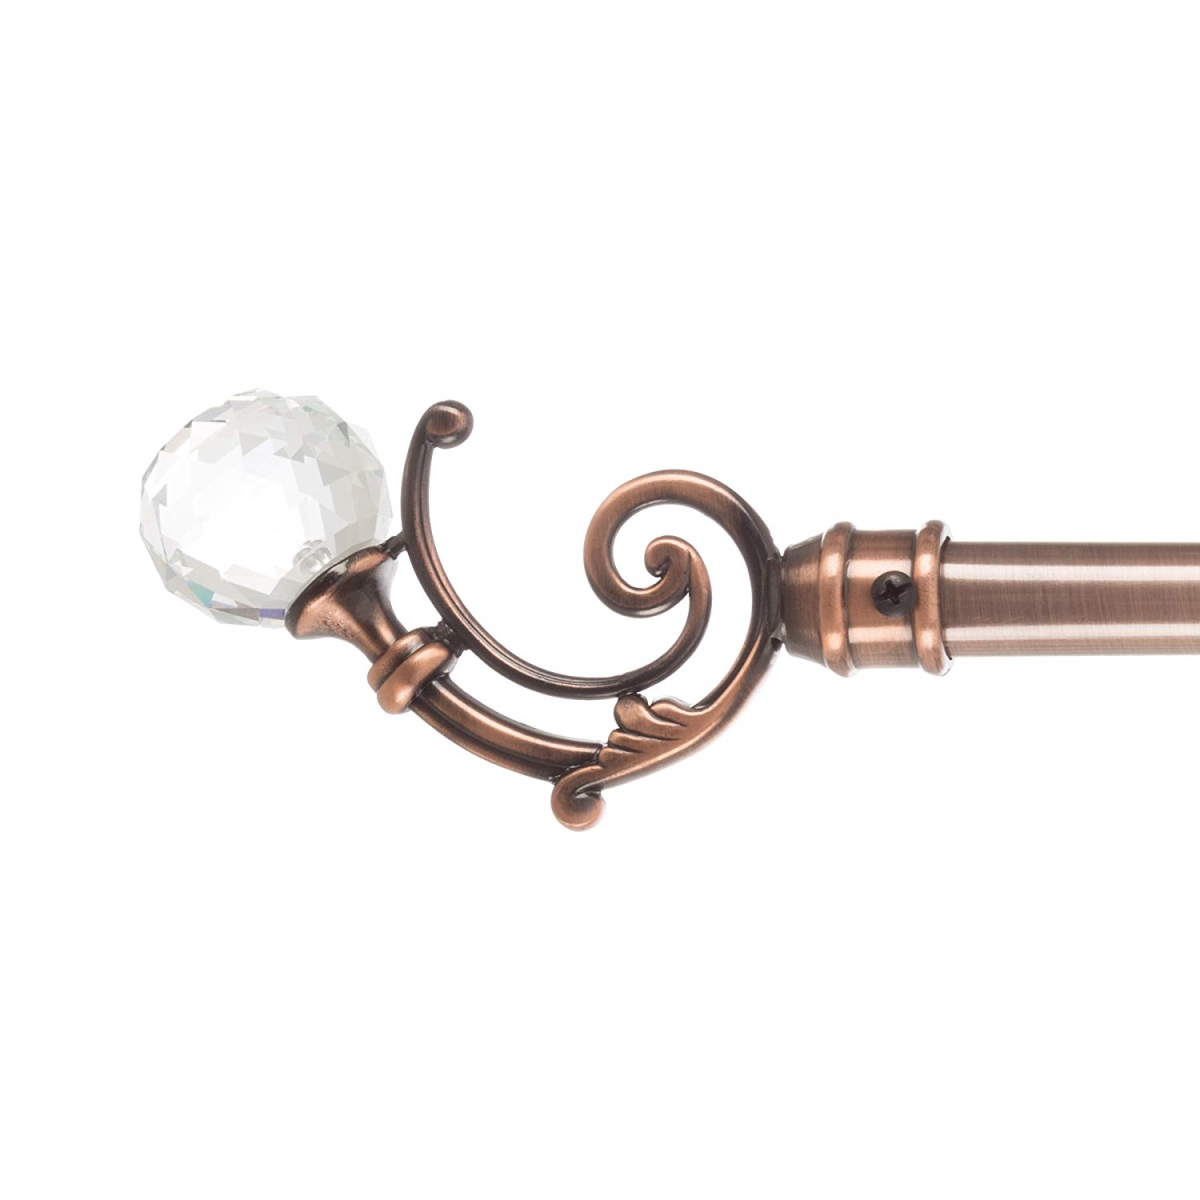 63a-47525 Curtain Rod Mounting Hardware Crystal Ball Finials, Copper - 48-86 In.